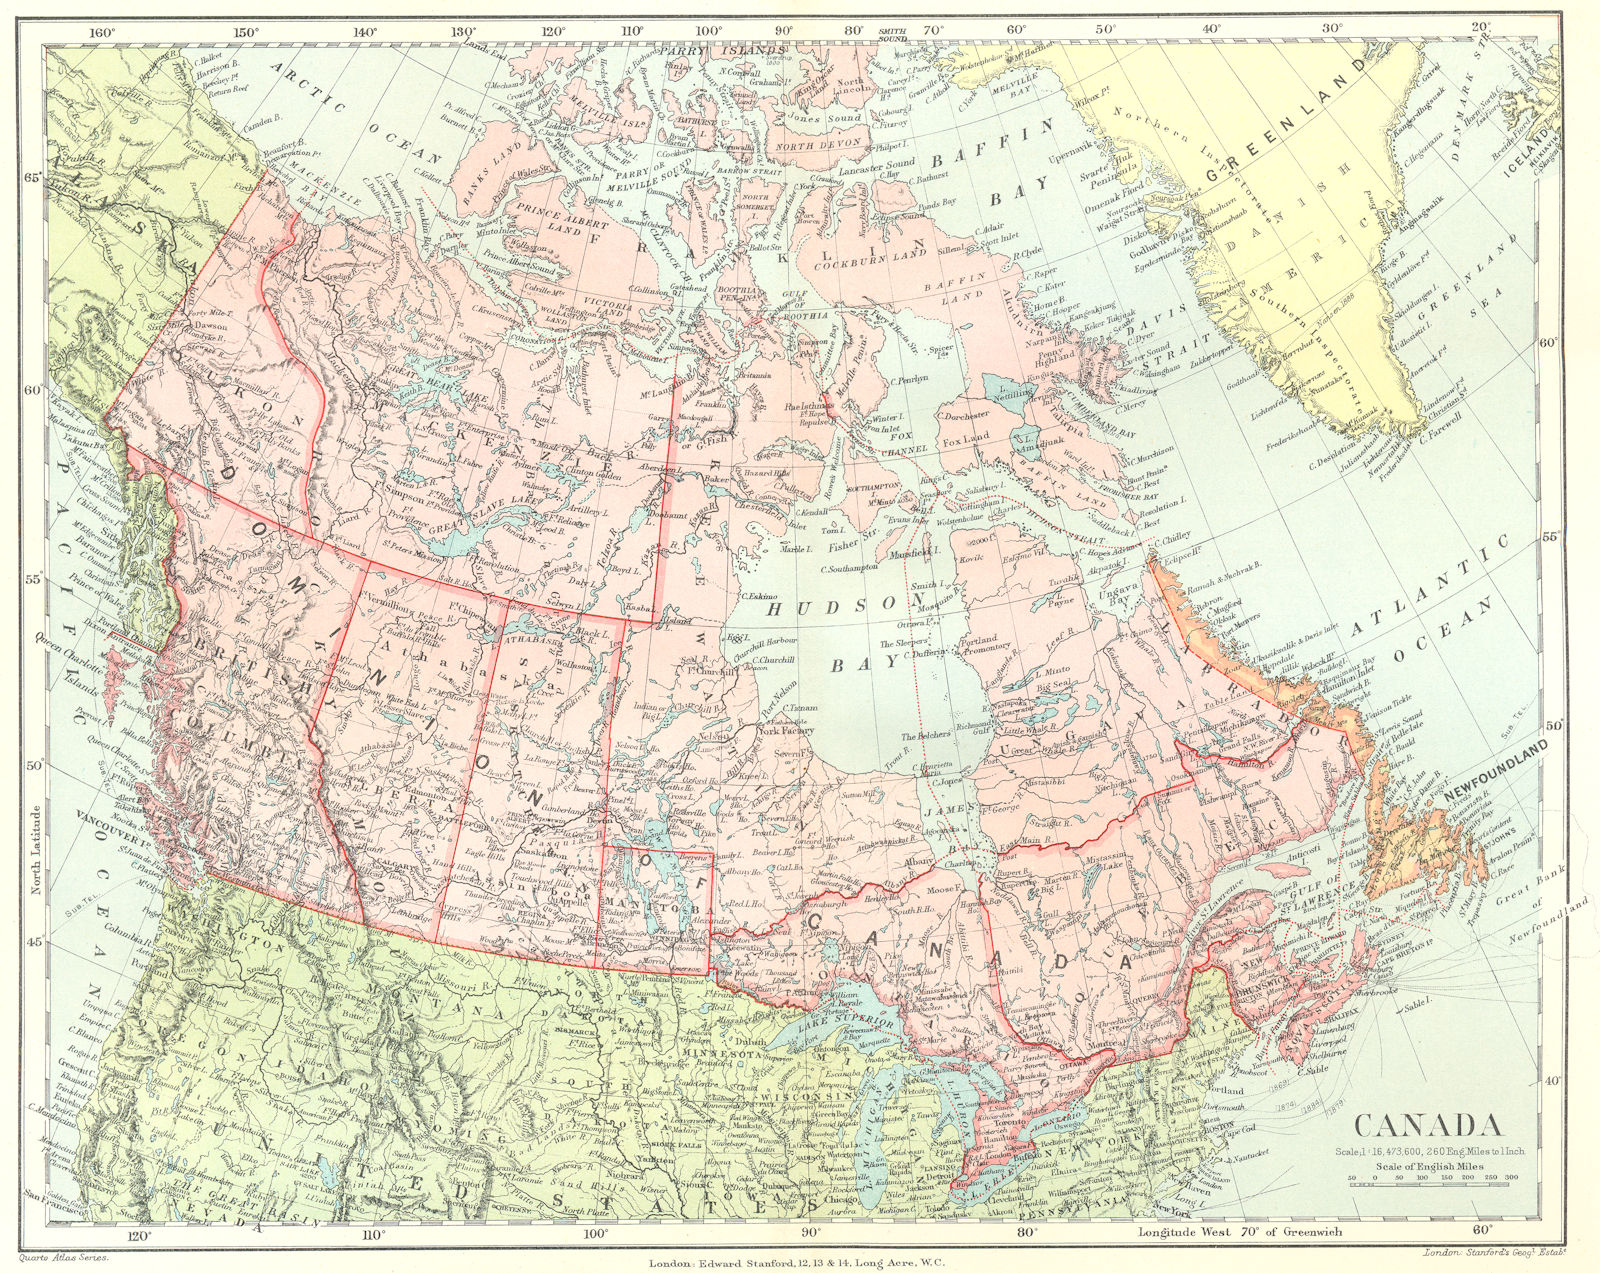 Associate Product DOMNION OF CANADA. colony of Newfoundland & Labrador separate.STANFORD 1906 map